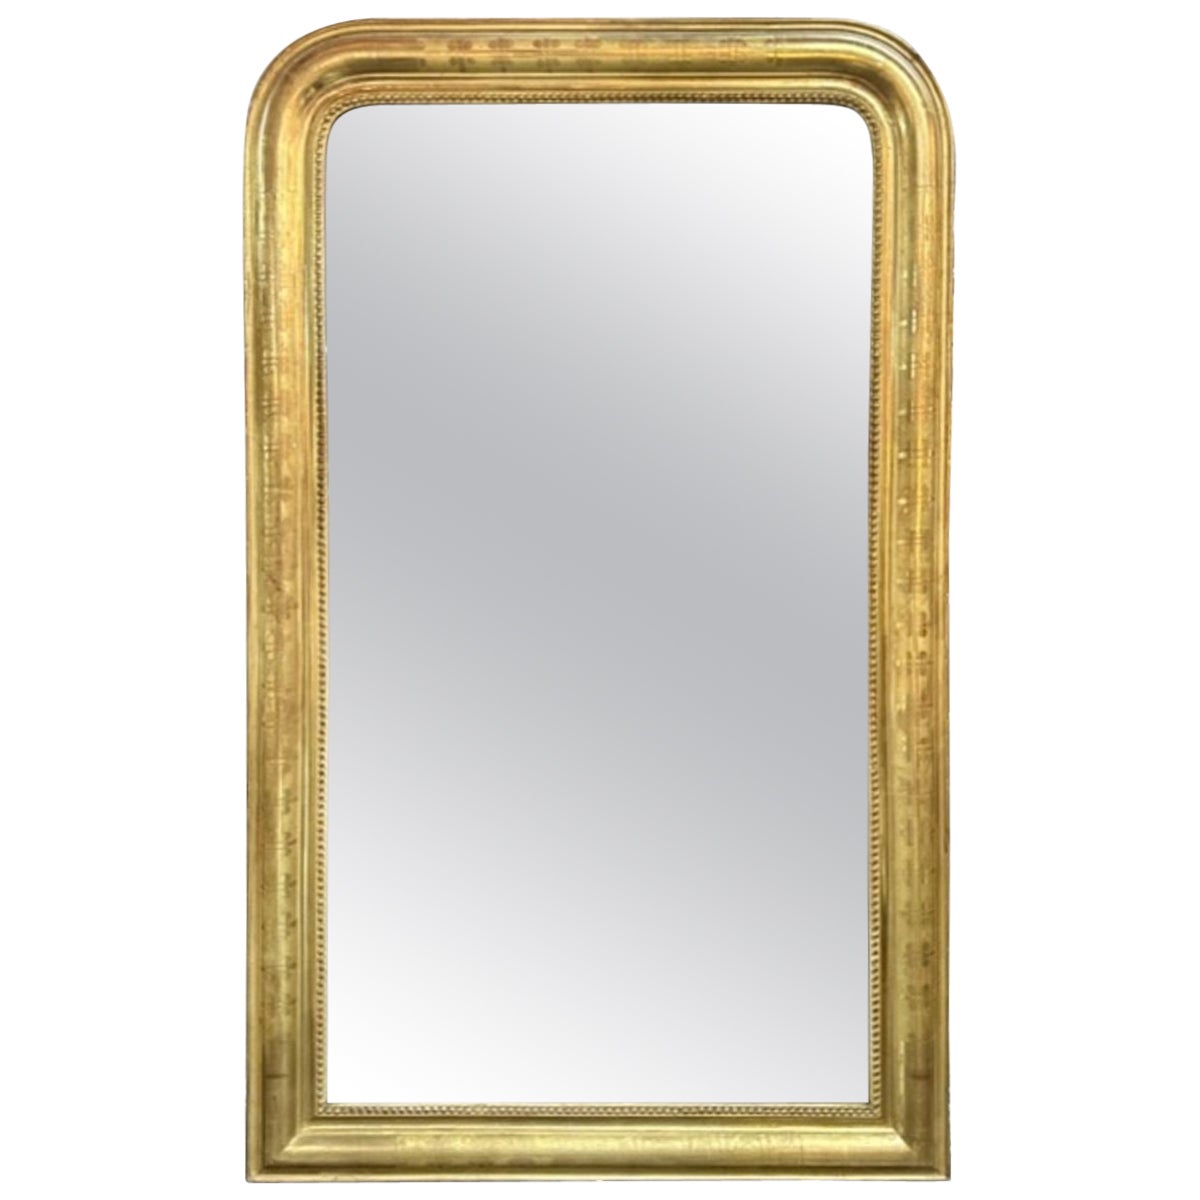 19th Century French Gold Leaf Louis Philippe Mirror